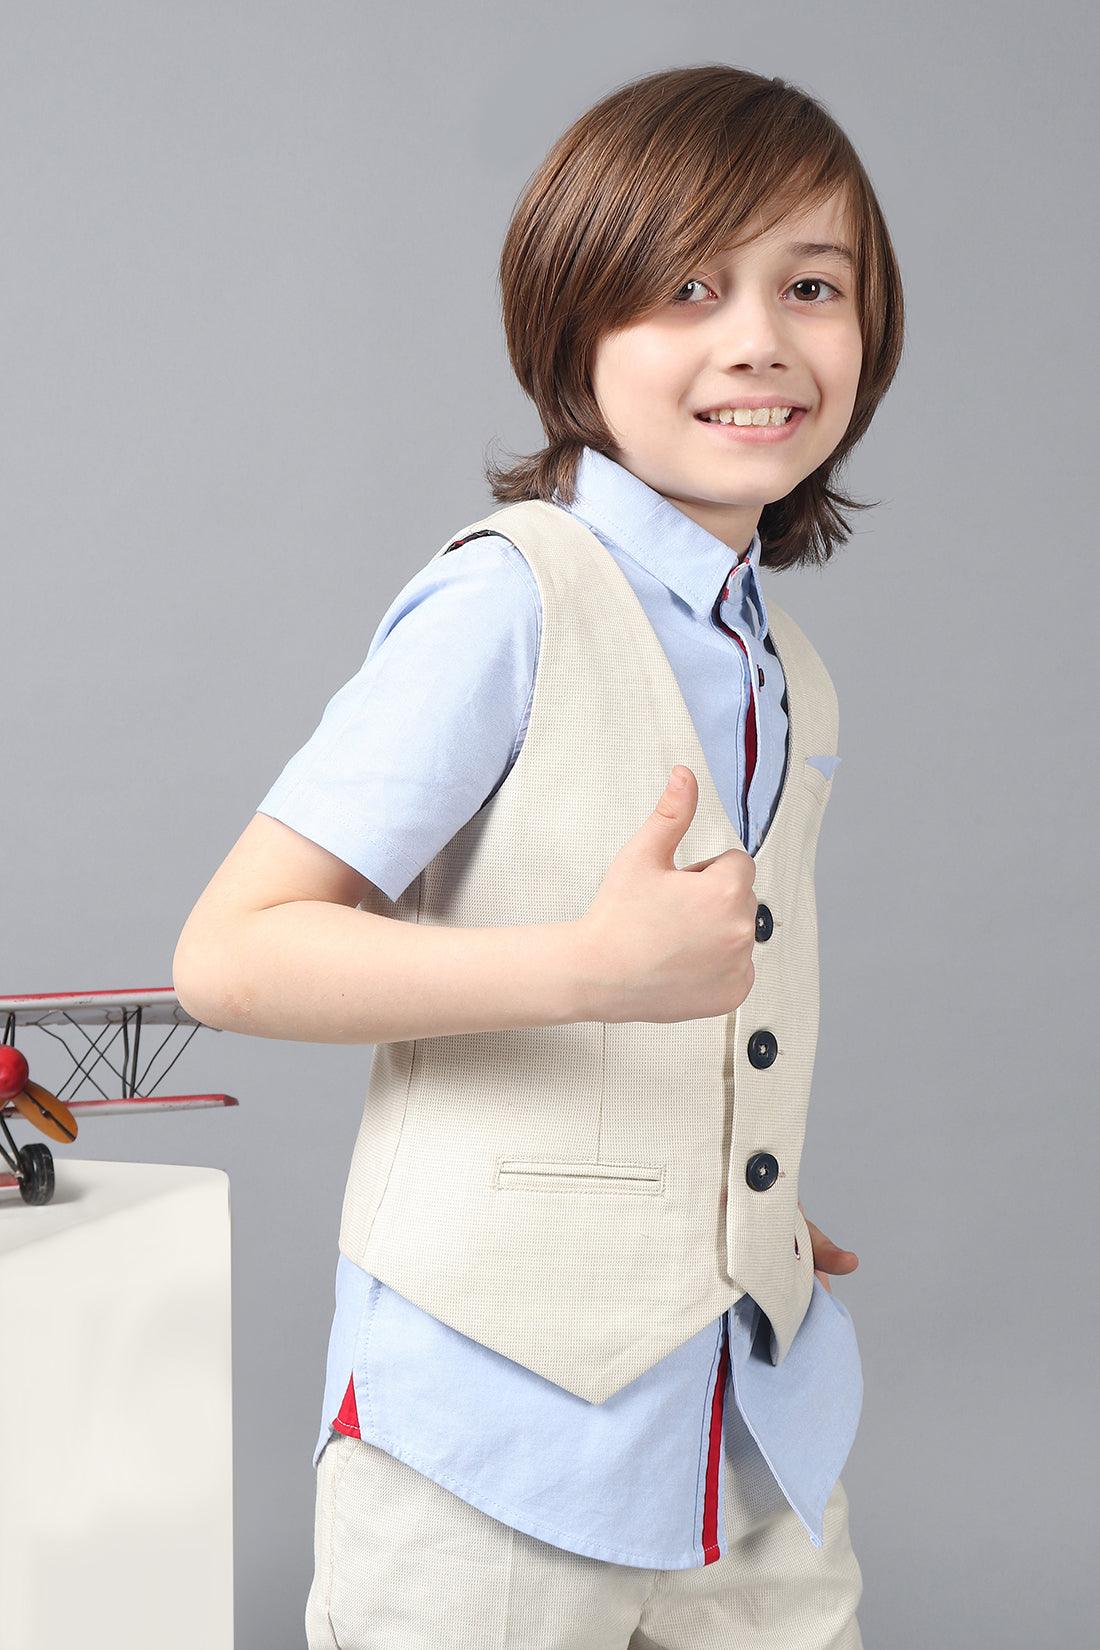 One Friday Kids Boys Beige 100% Cotton Waistcoat with Avengers Embroidery - One Friday World